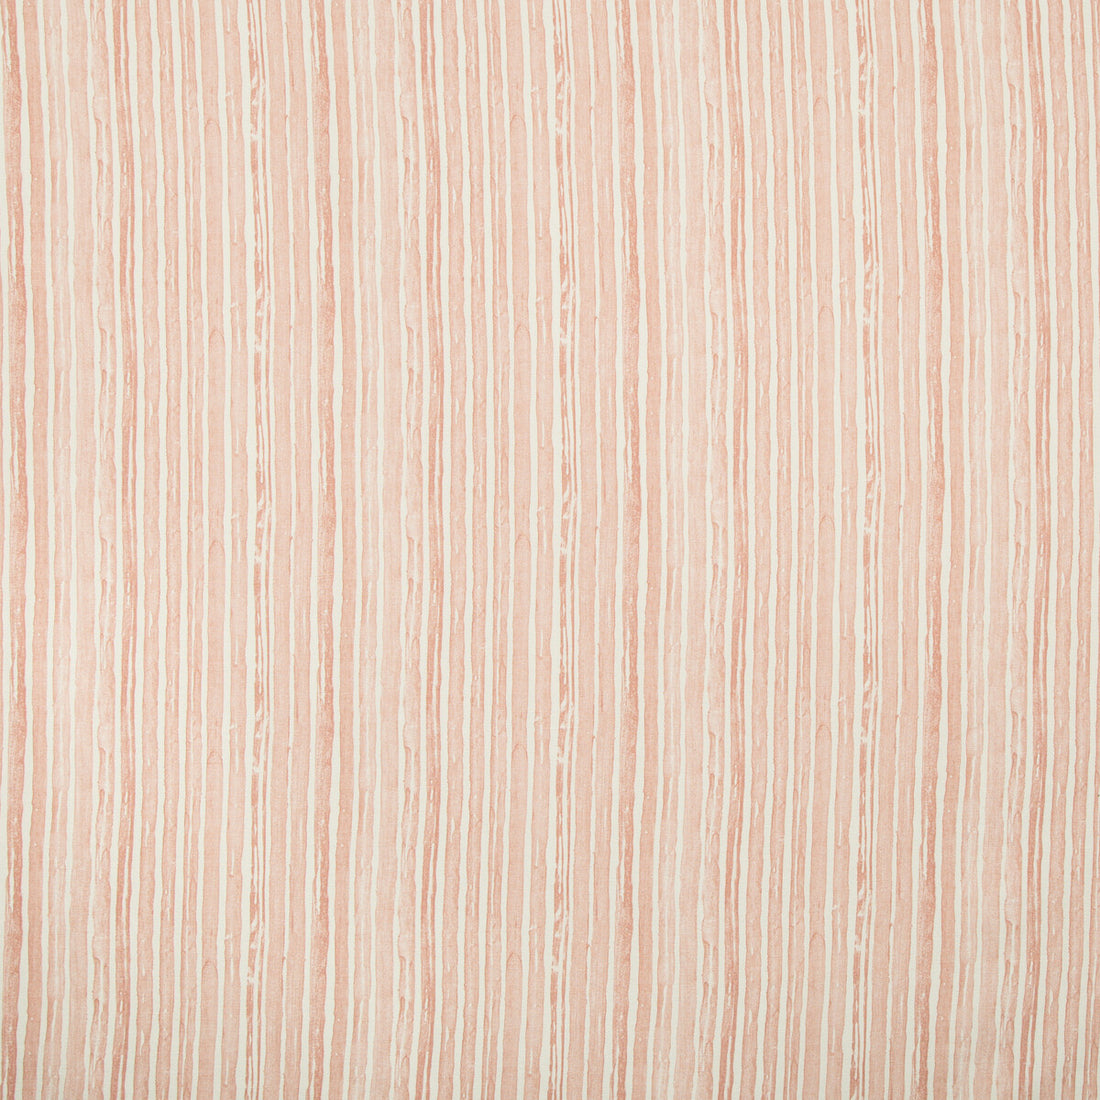 Benson Stripe fabric in faded petal color - pattern 2019151.7.0 - by Lee Jofa in the Carrier And Company collection